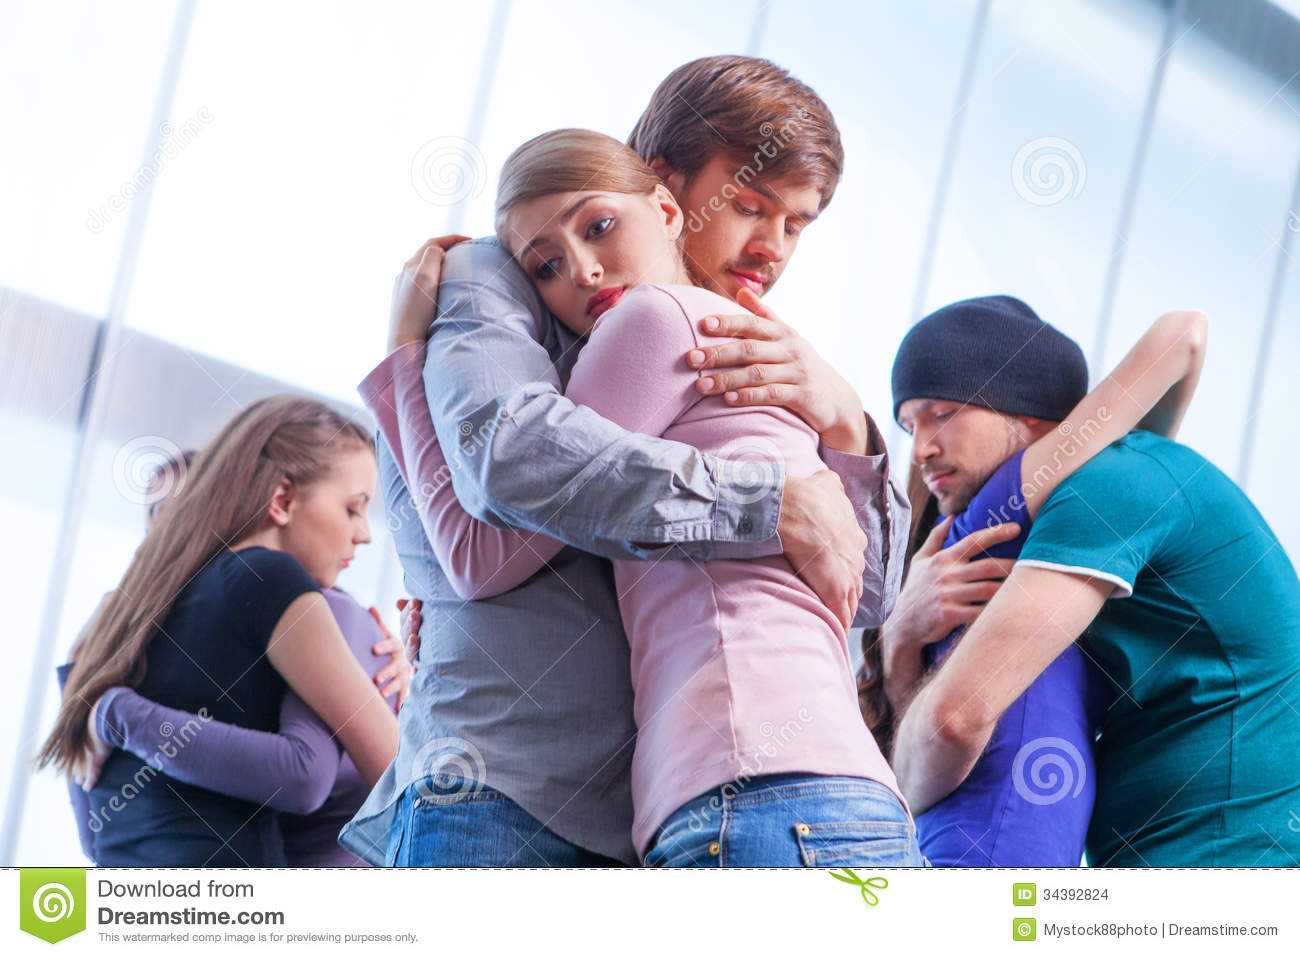 Three Pair Of People Hugging Each Other  Stock Images   Image